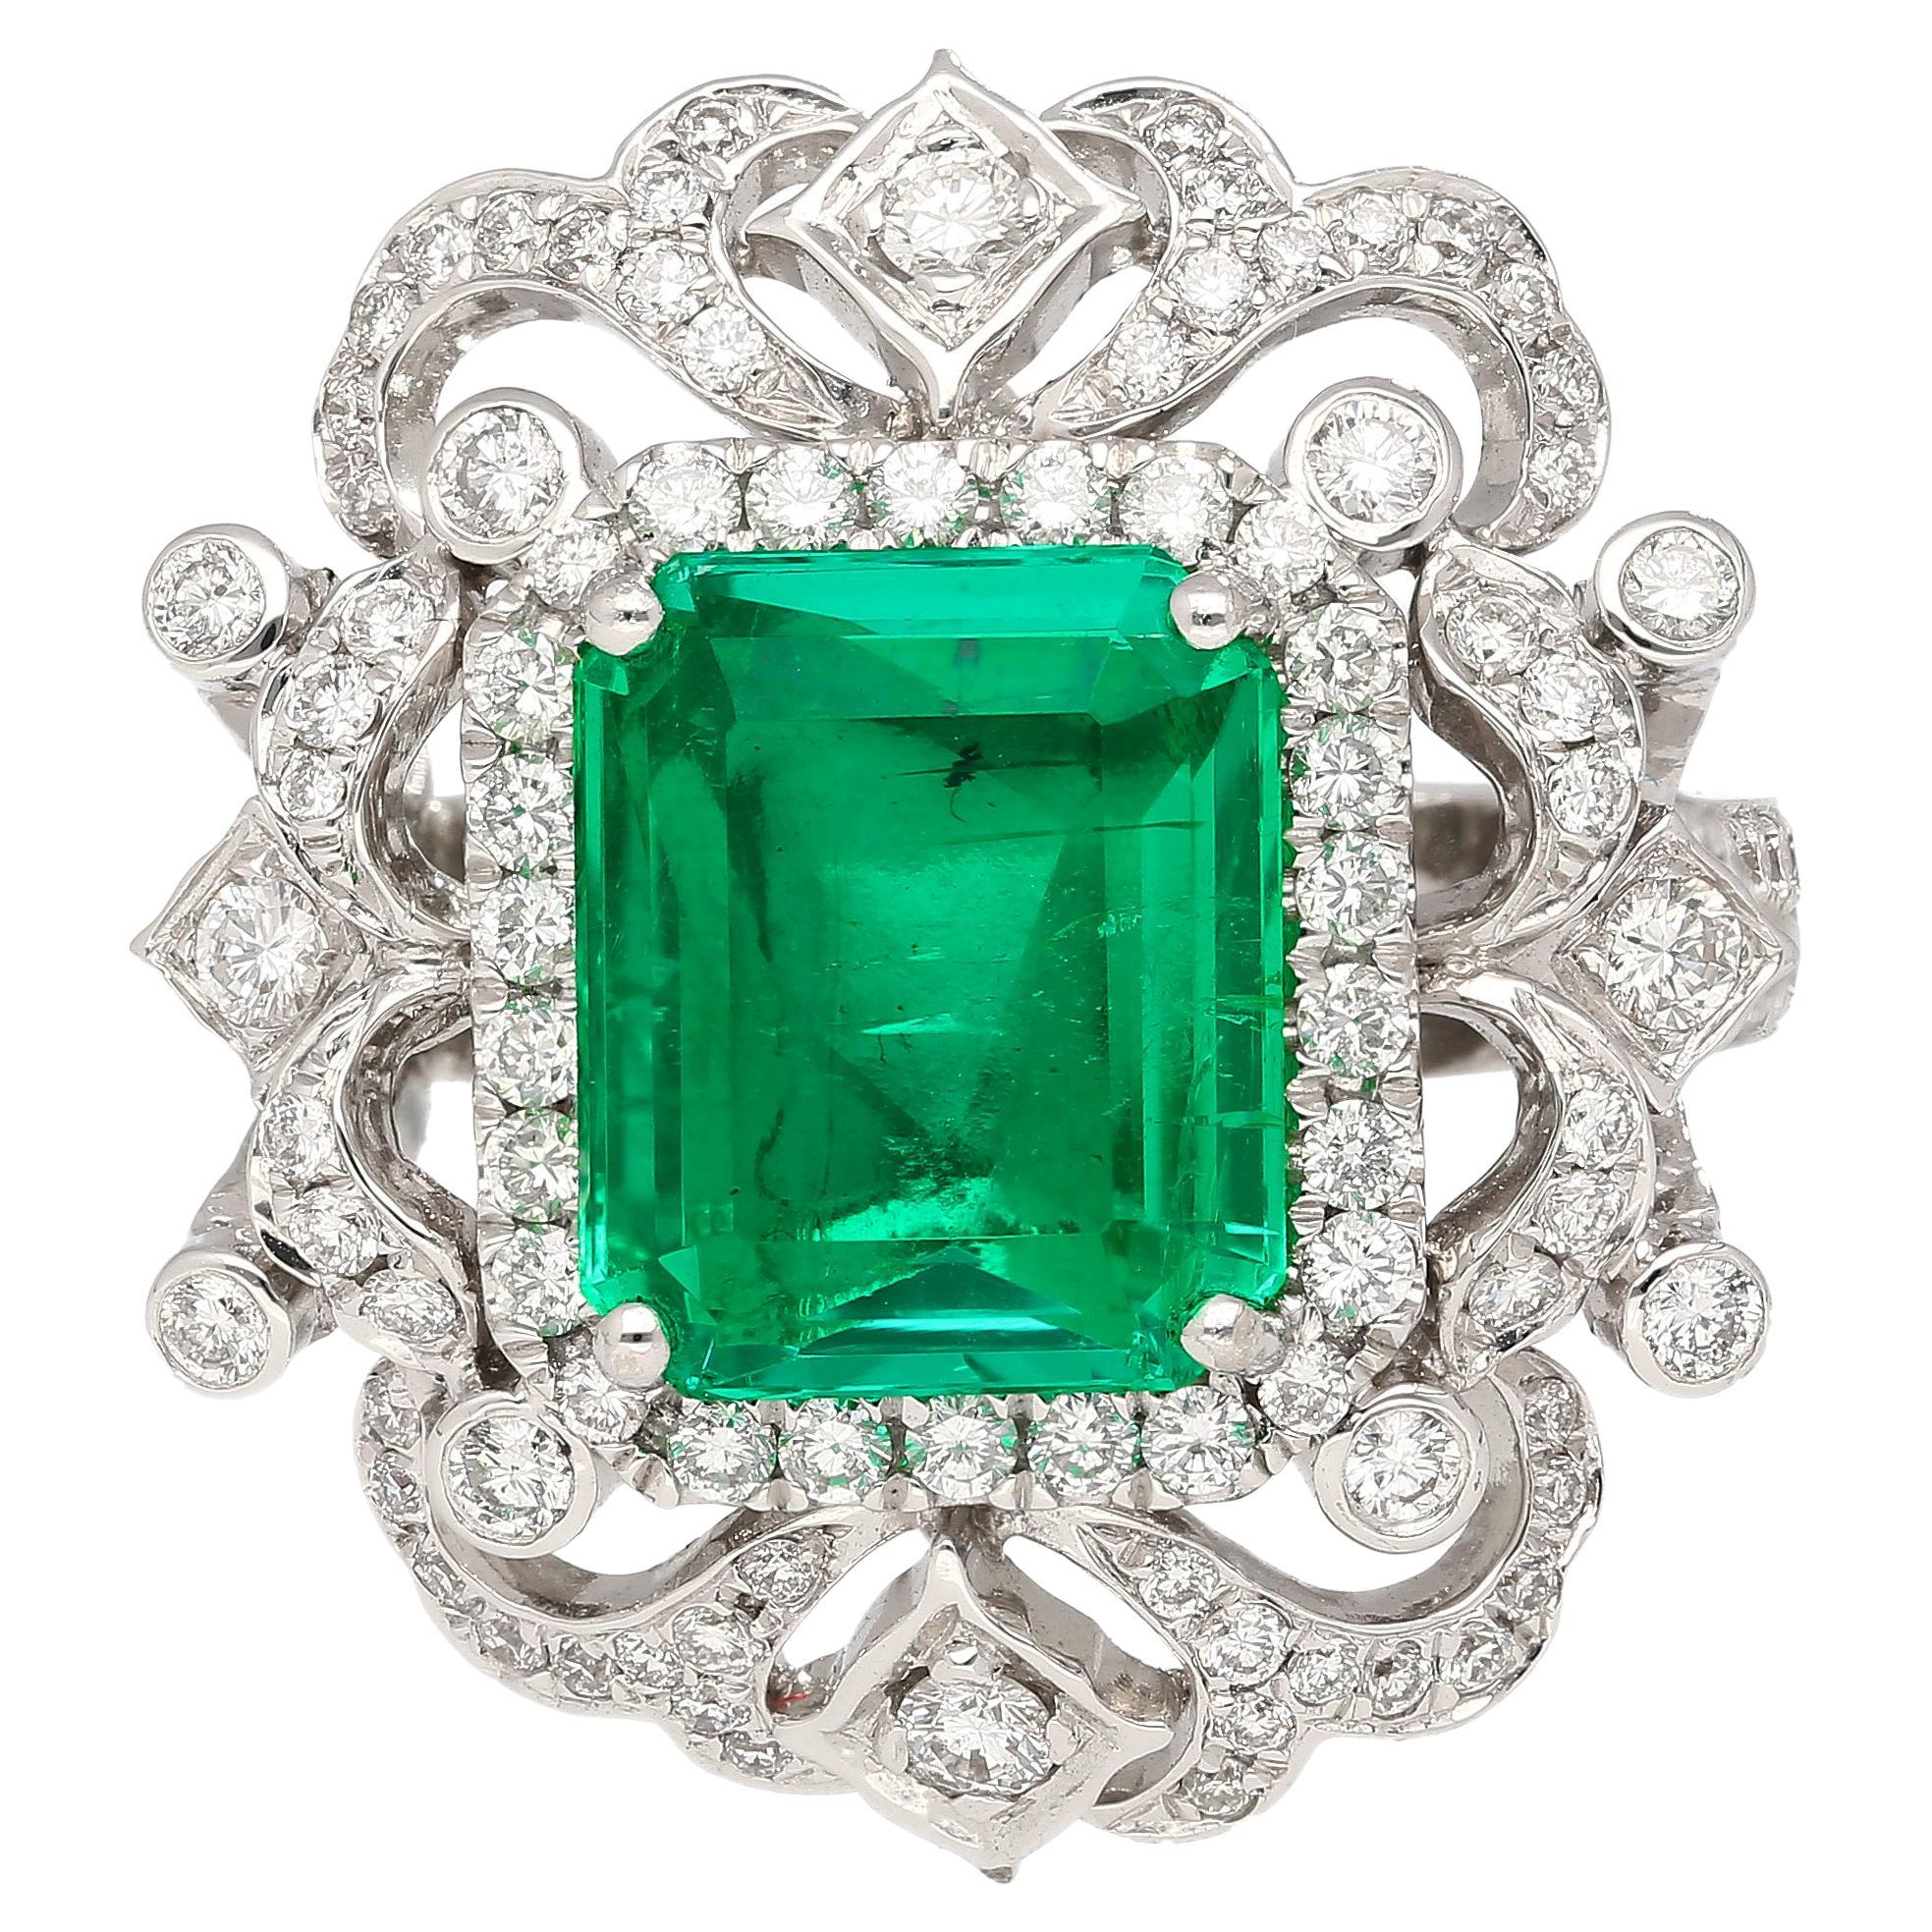 GIA Certified 3.75 Carat Colombian Emerald in 18k White Gold Art Deco Ring For Sale